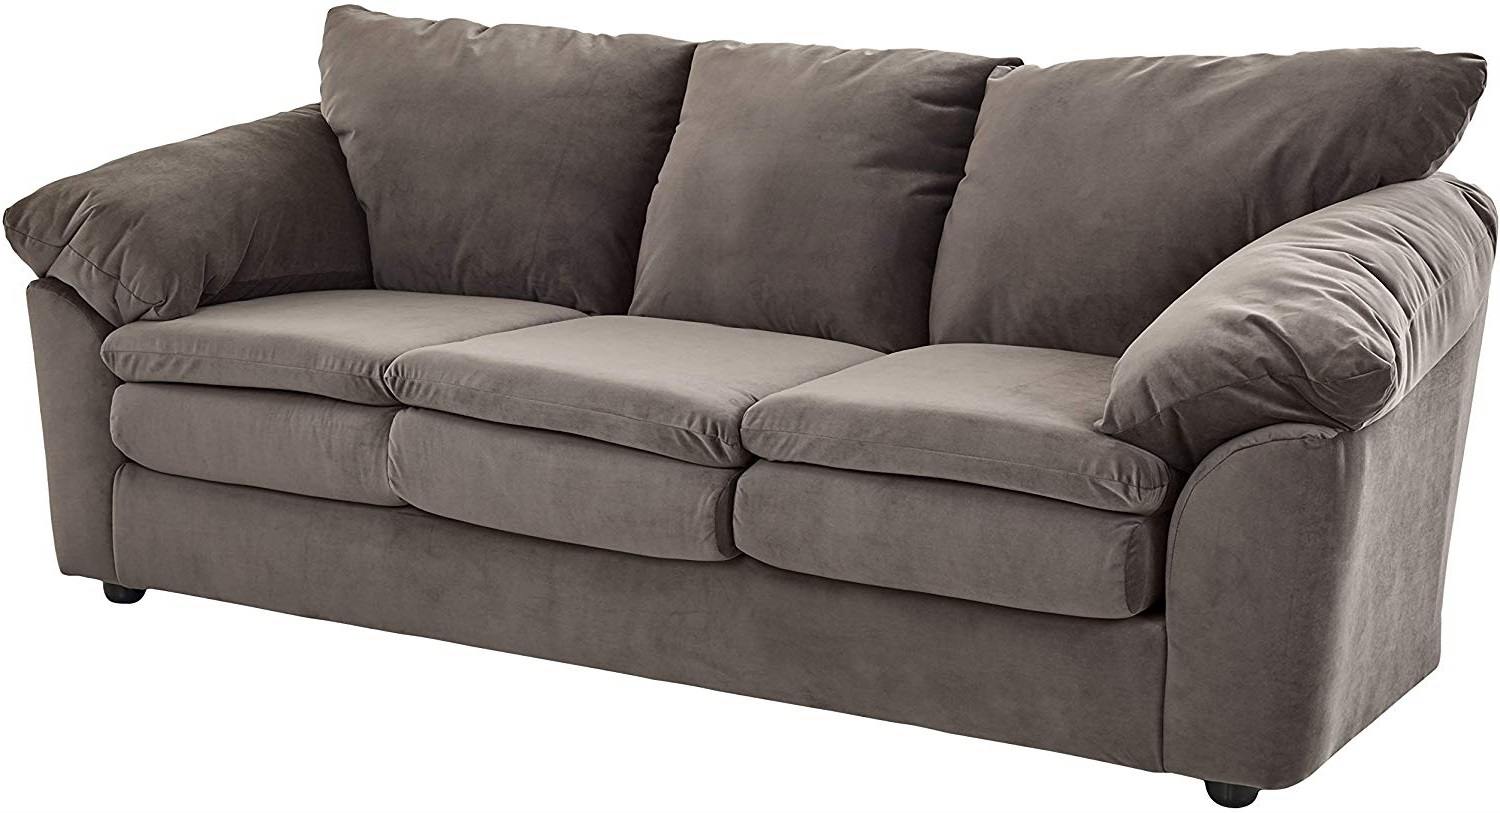 couch or sofa uk        <h3 class=